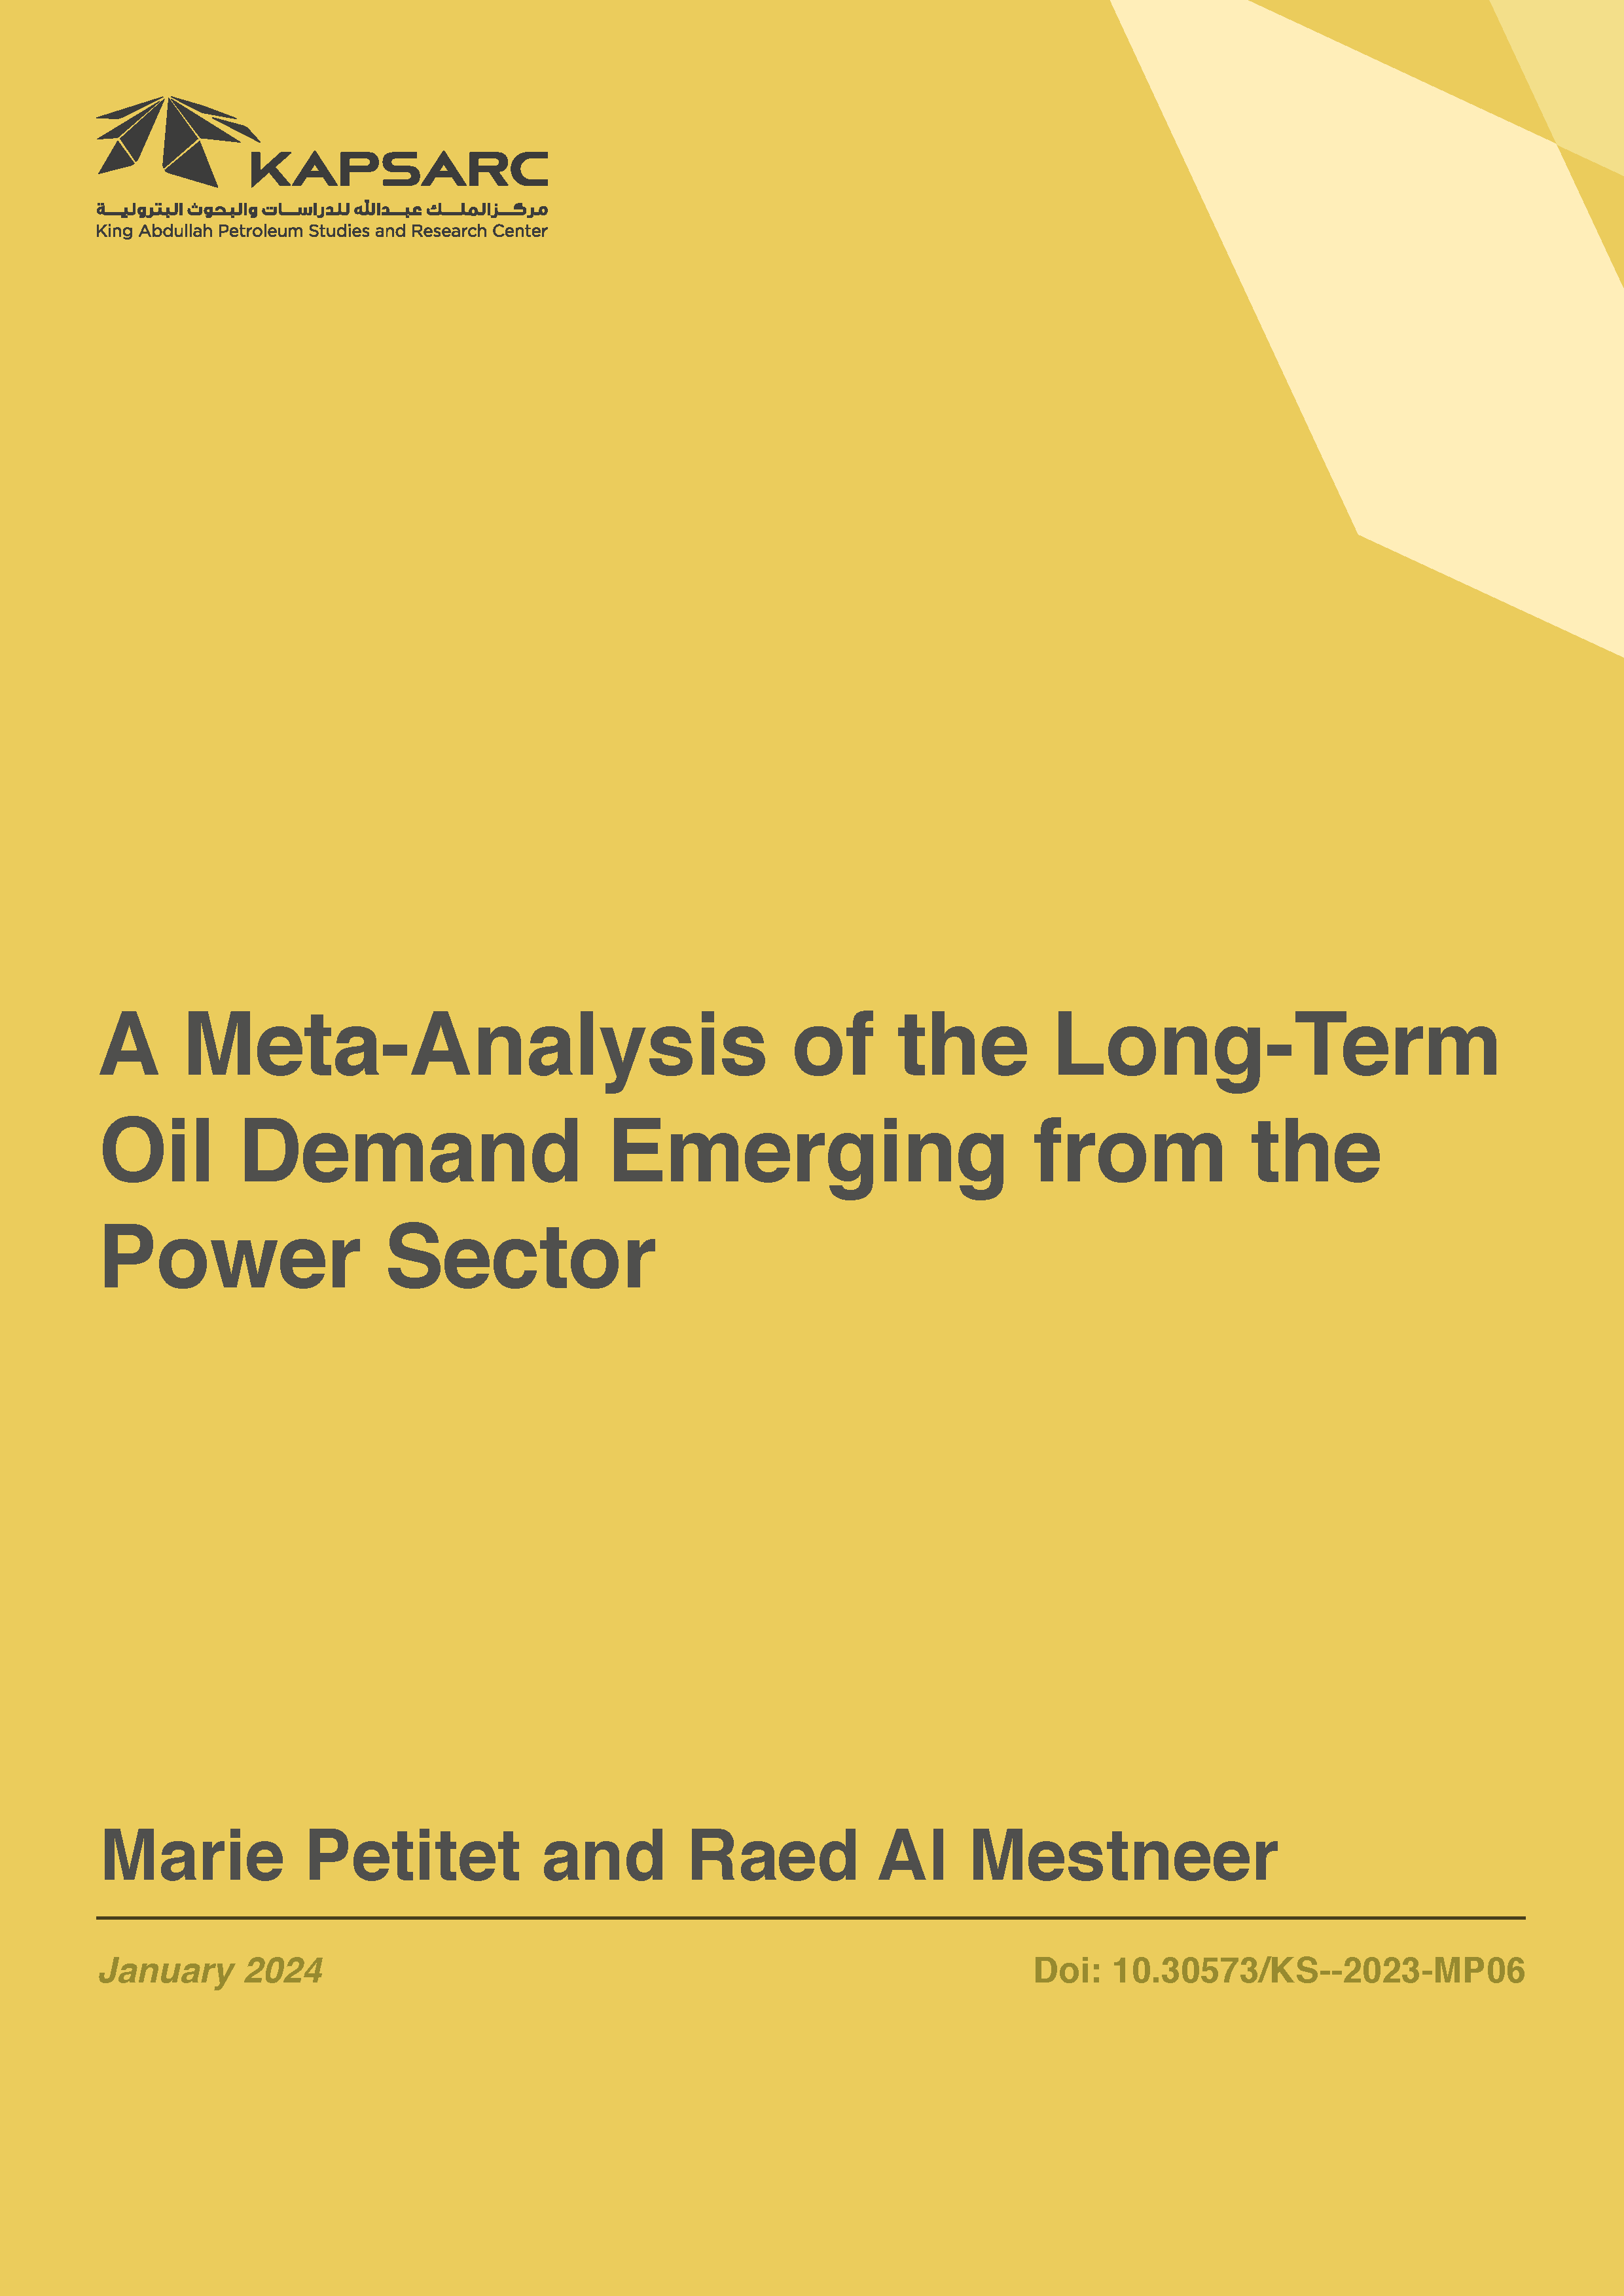 A Meta-Analysis of the Long-Term Oil Demand Emerging from the Power Sector